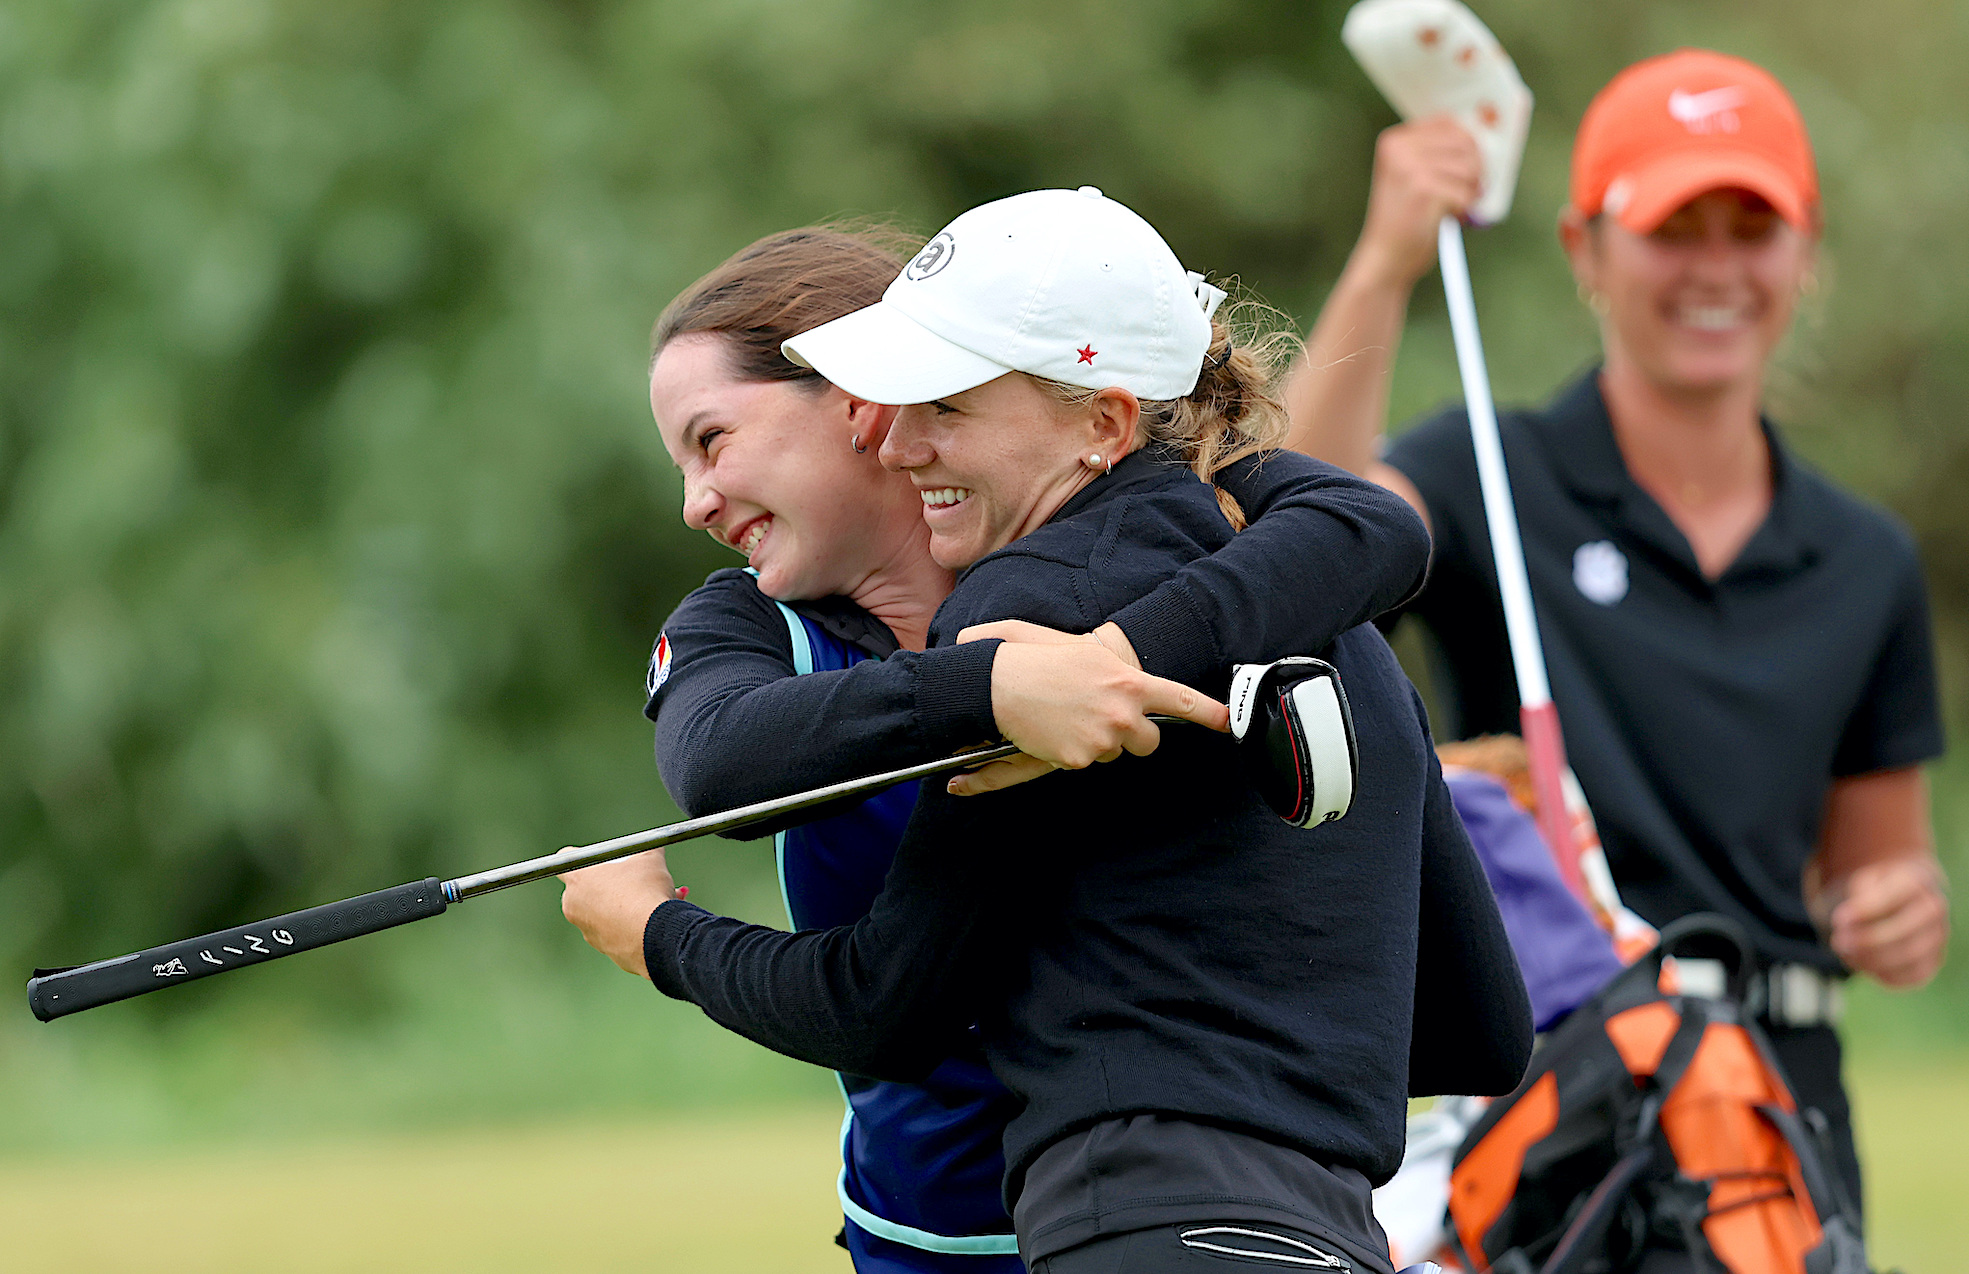 2023 Women's Amateur champion Chiara Horder celebrates with caddy Charlotte Back